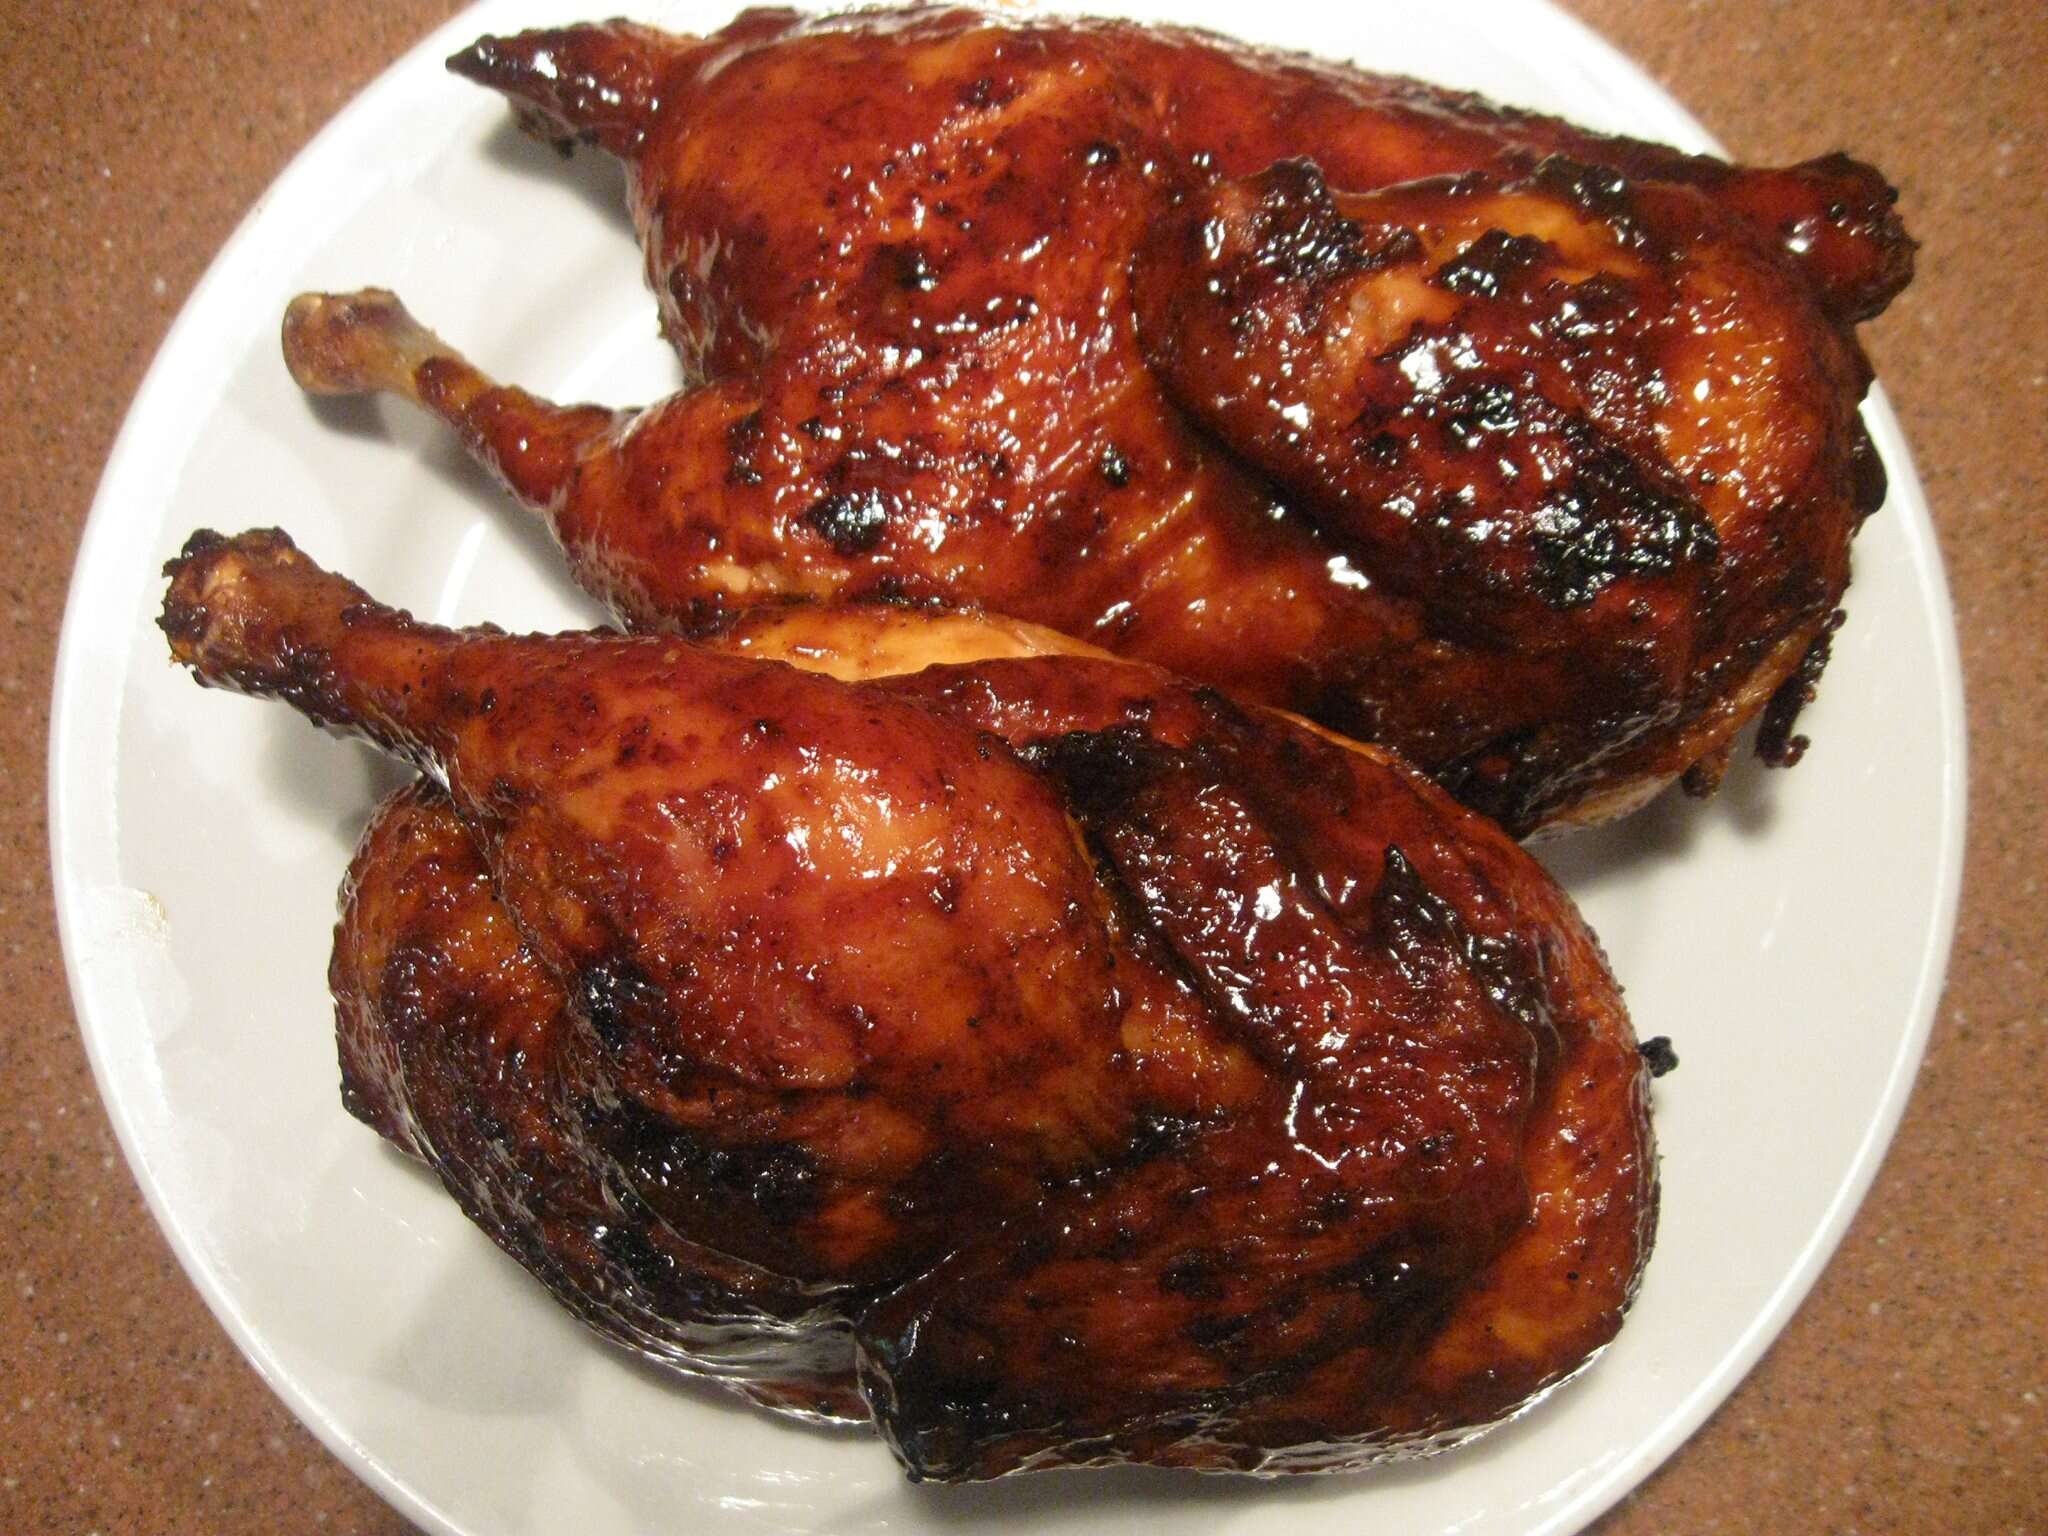 Barbecued chicken on plate